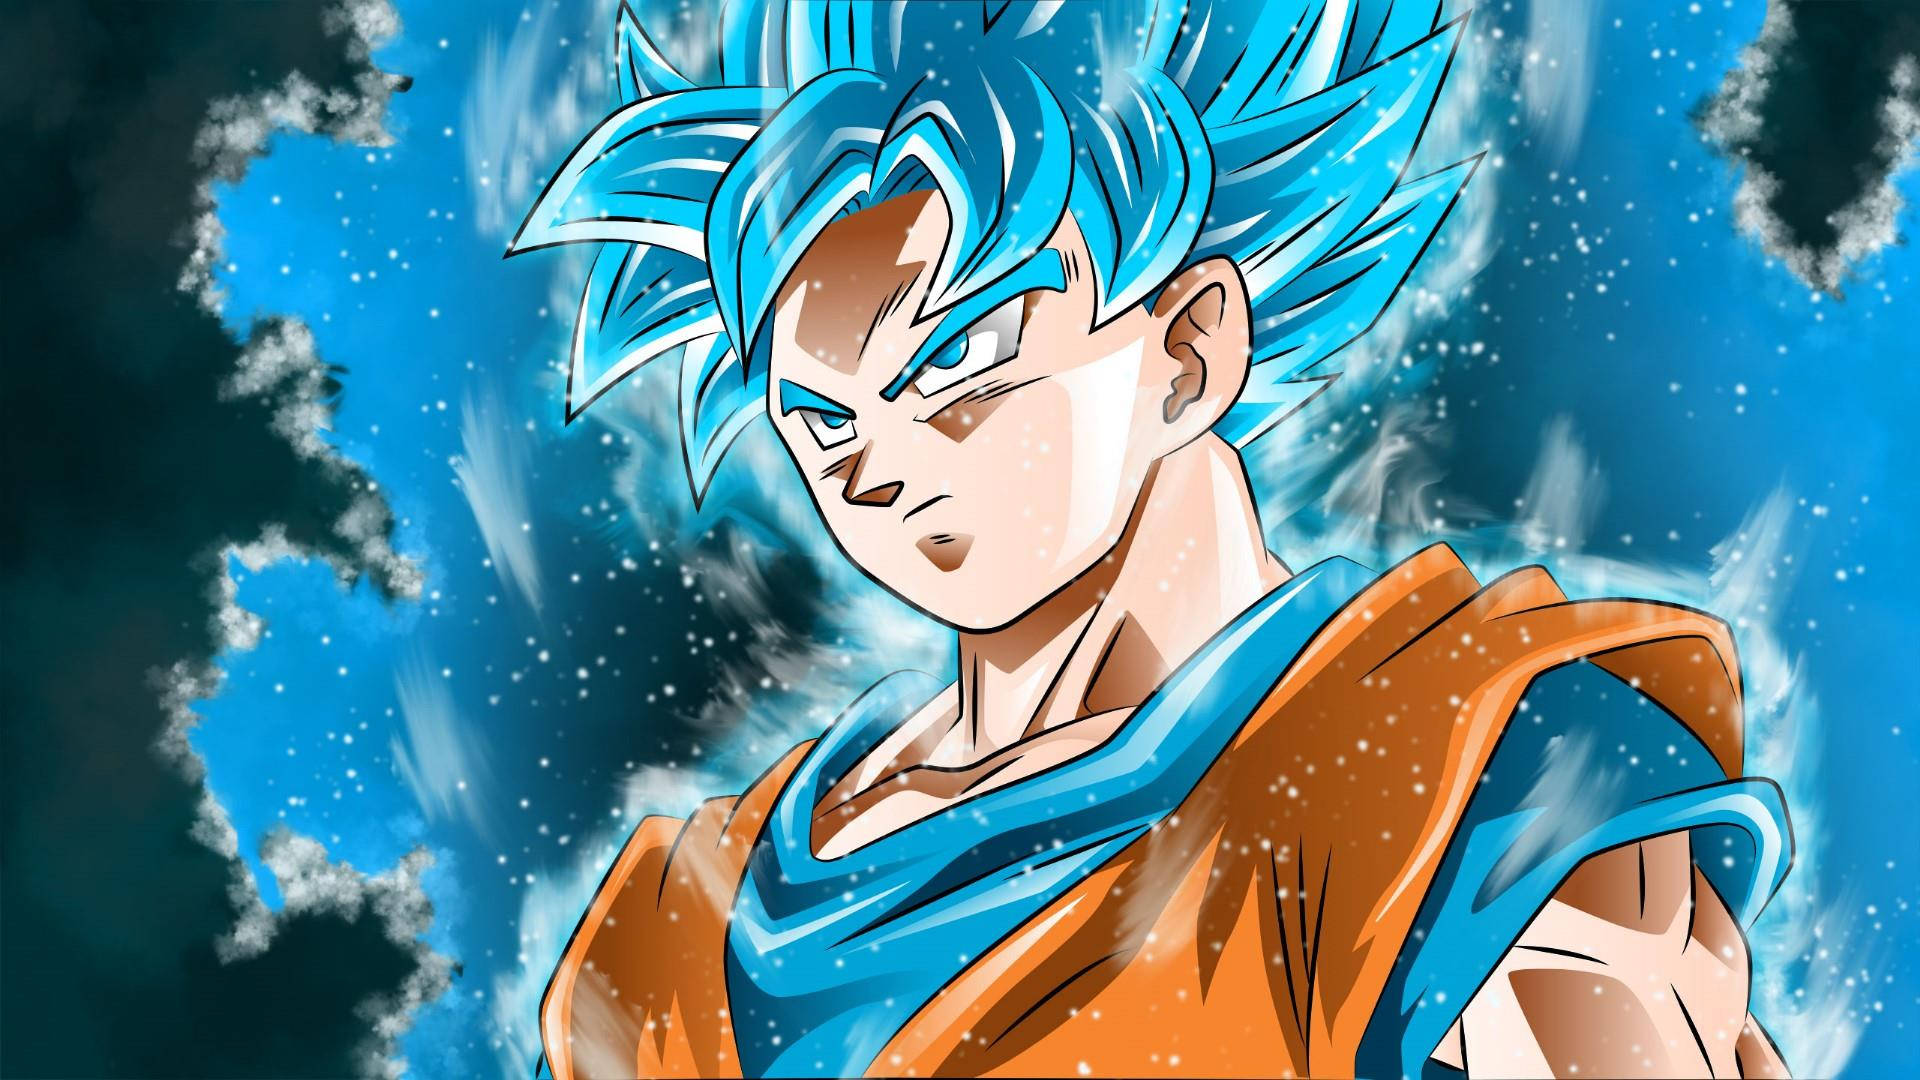 The Iconic Son Goku In An Iconic Pose Wallpaper